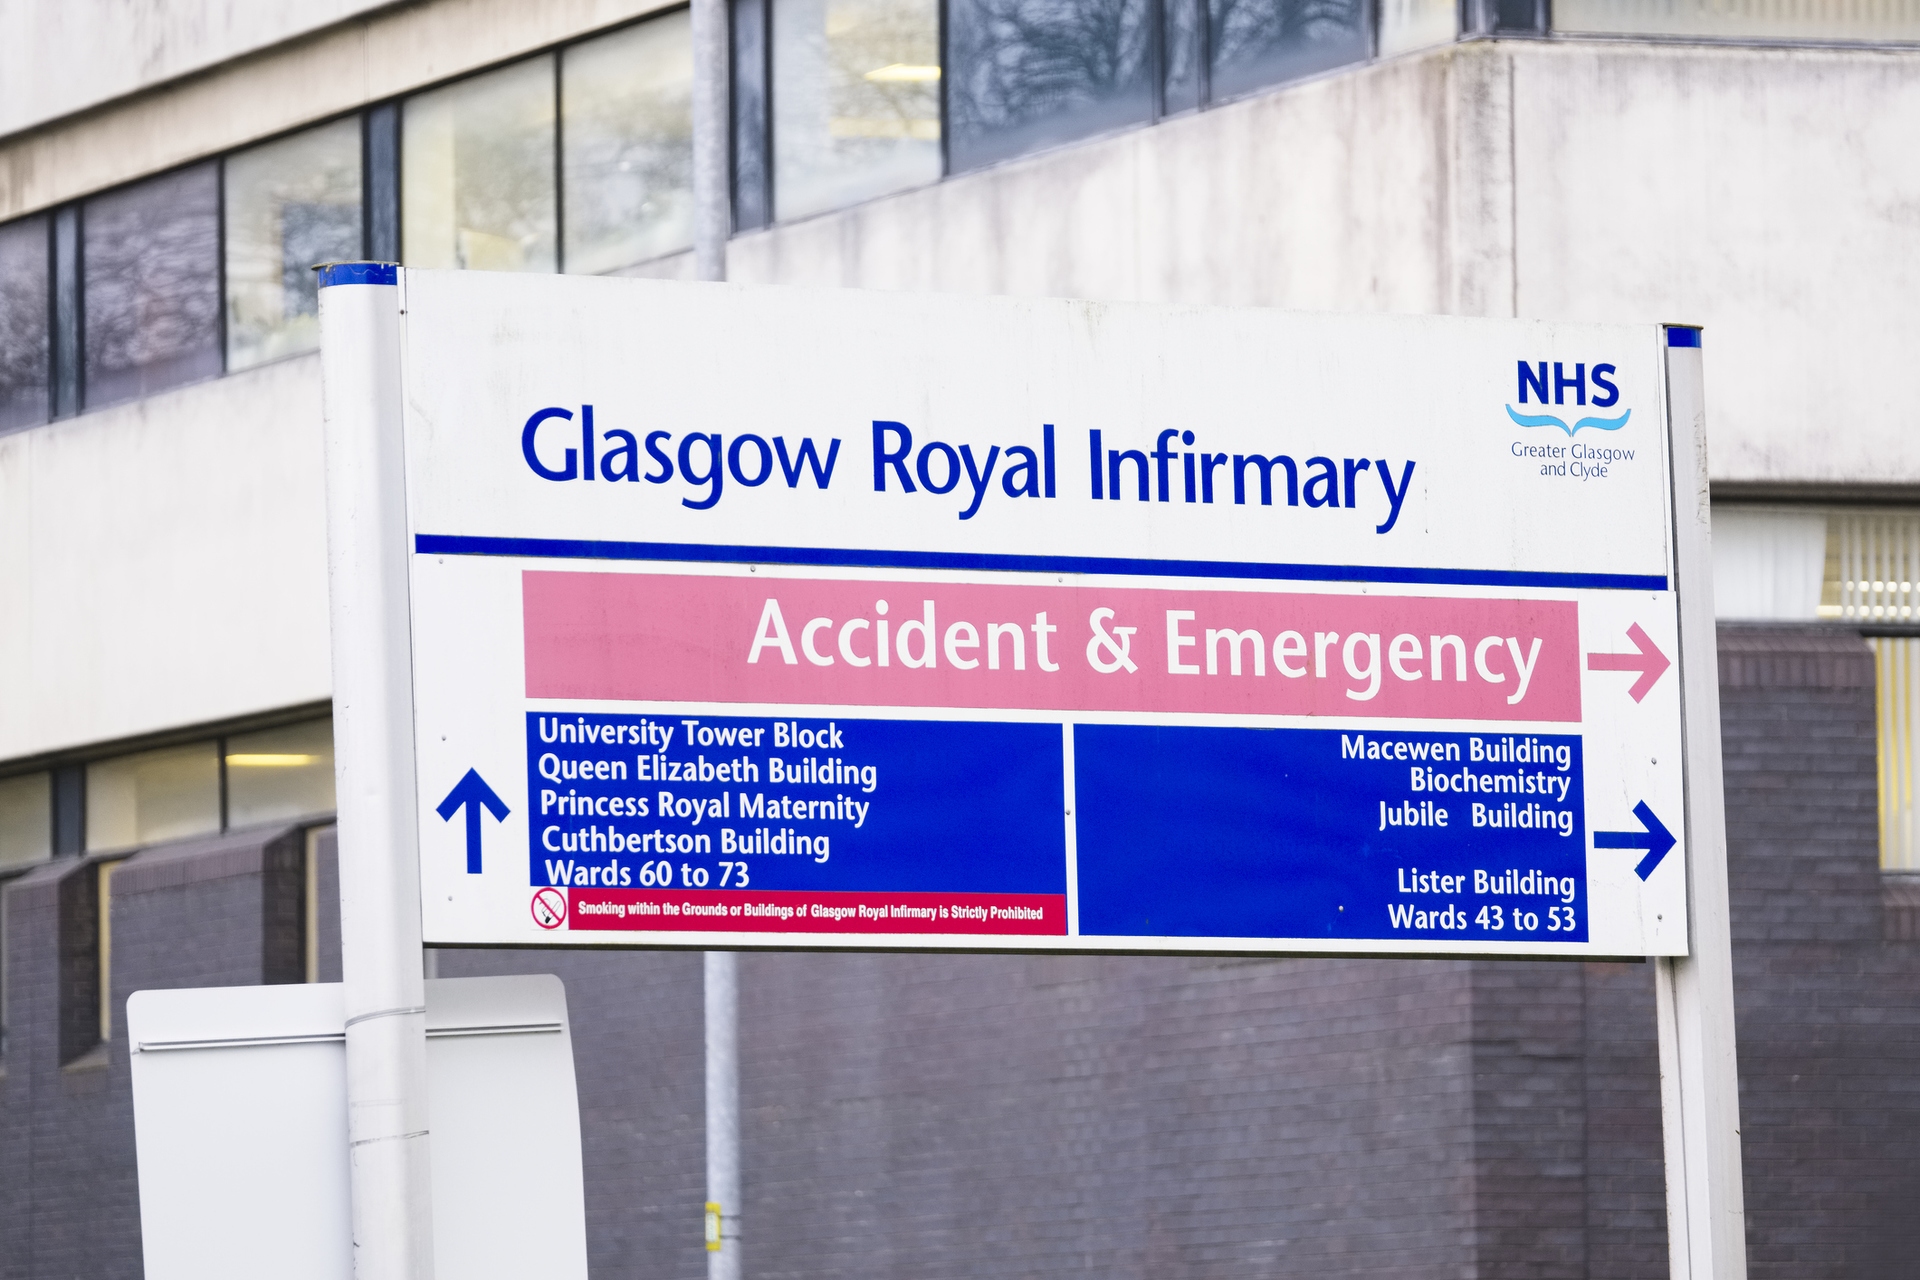 Glasgow Royal Infirmary came in at 26th place. 